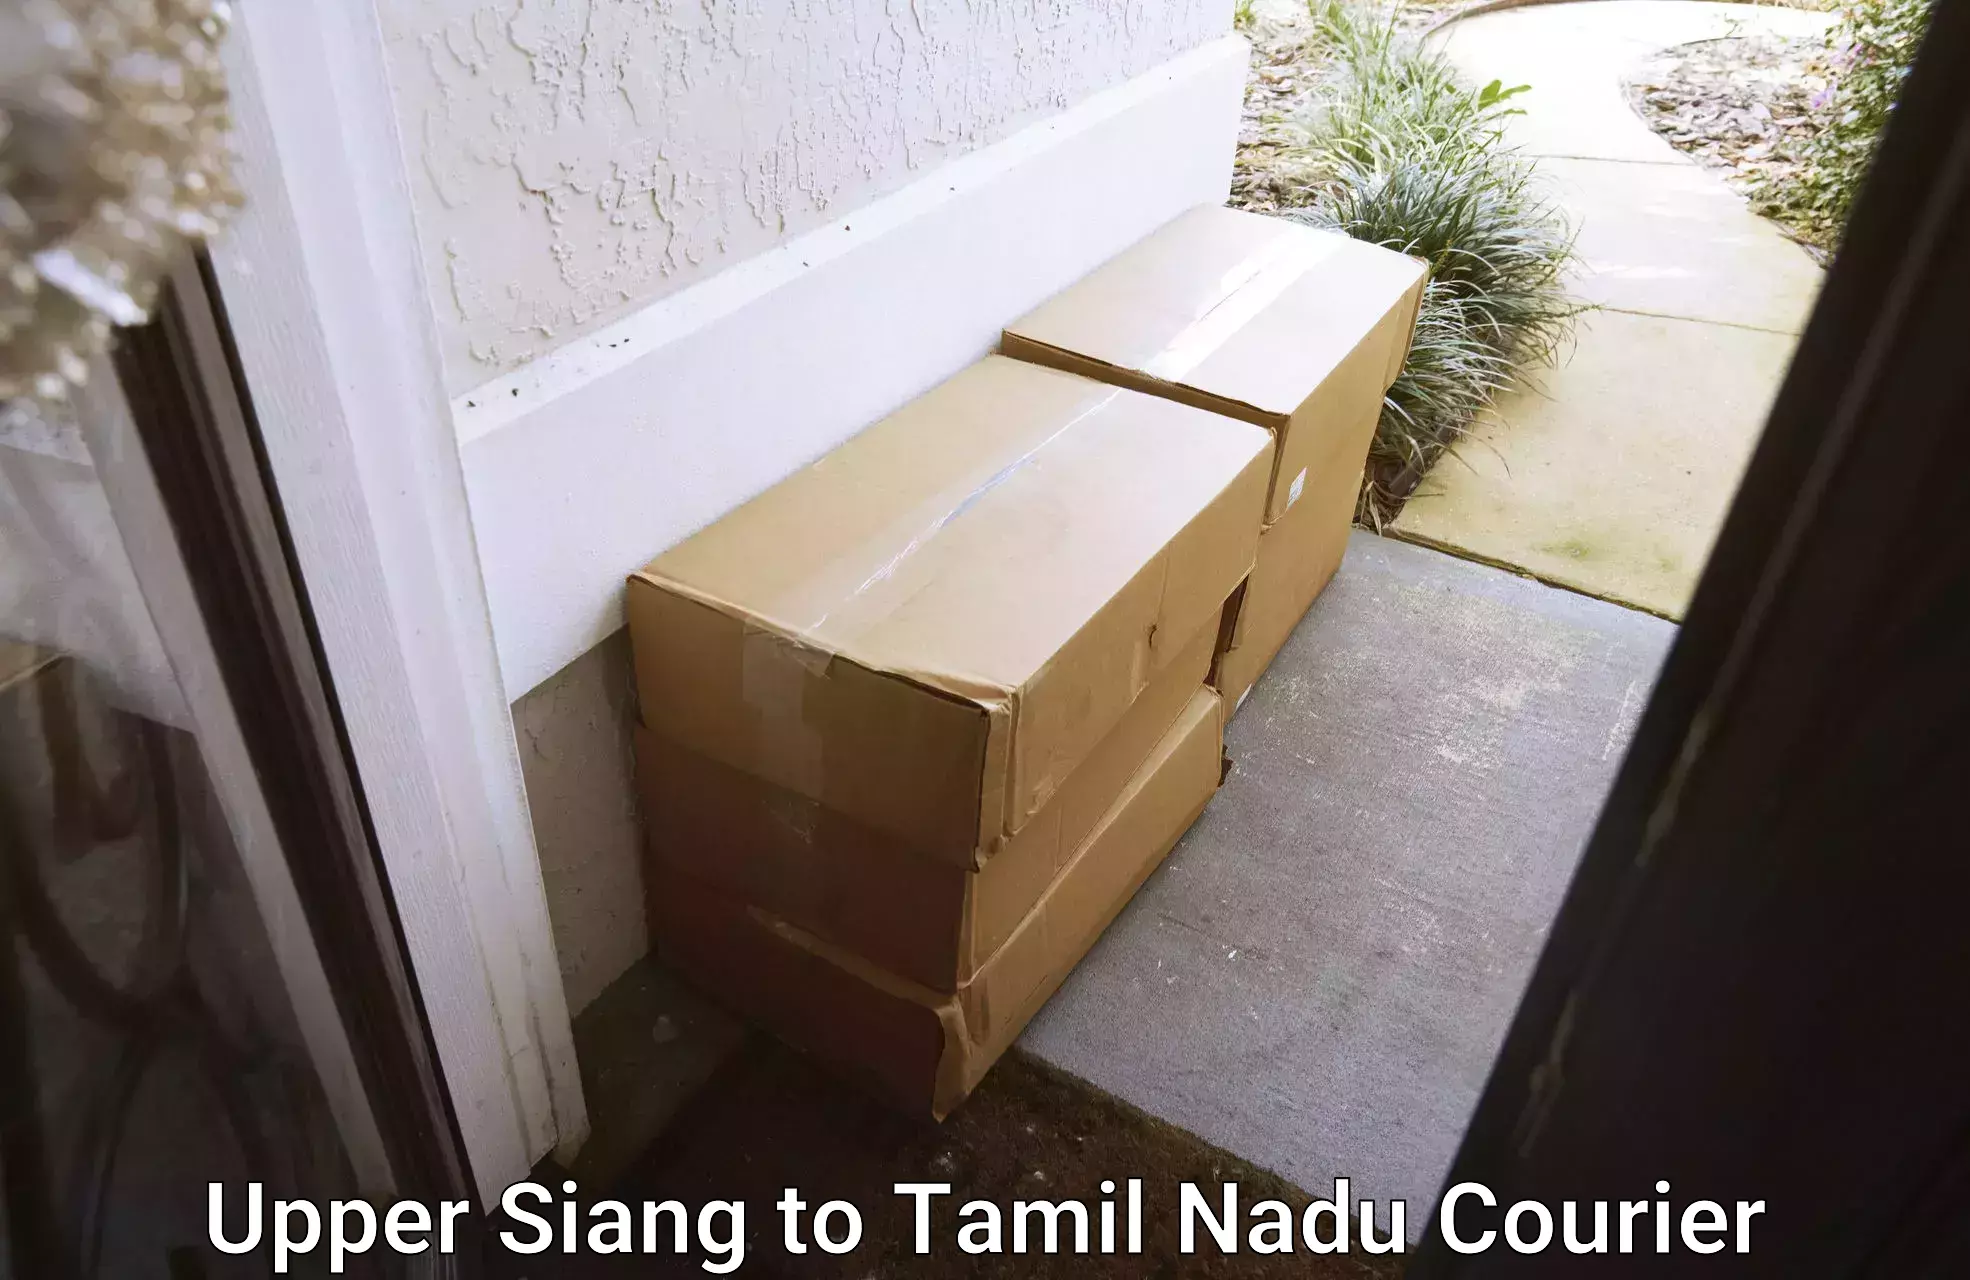 24-hour courier service Upper Siang to Kodumudi